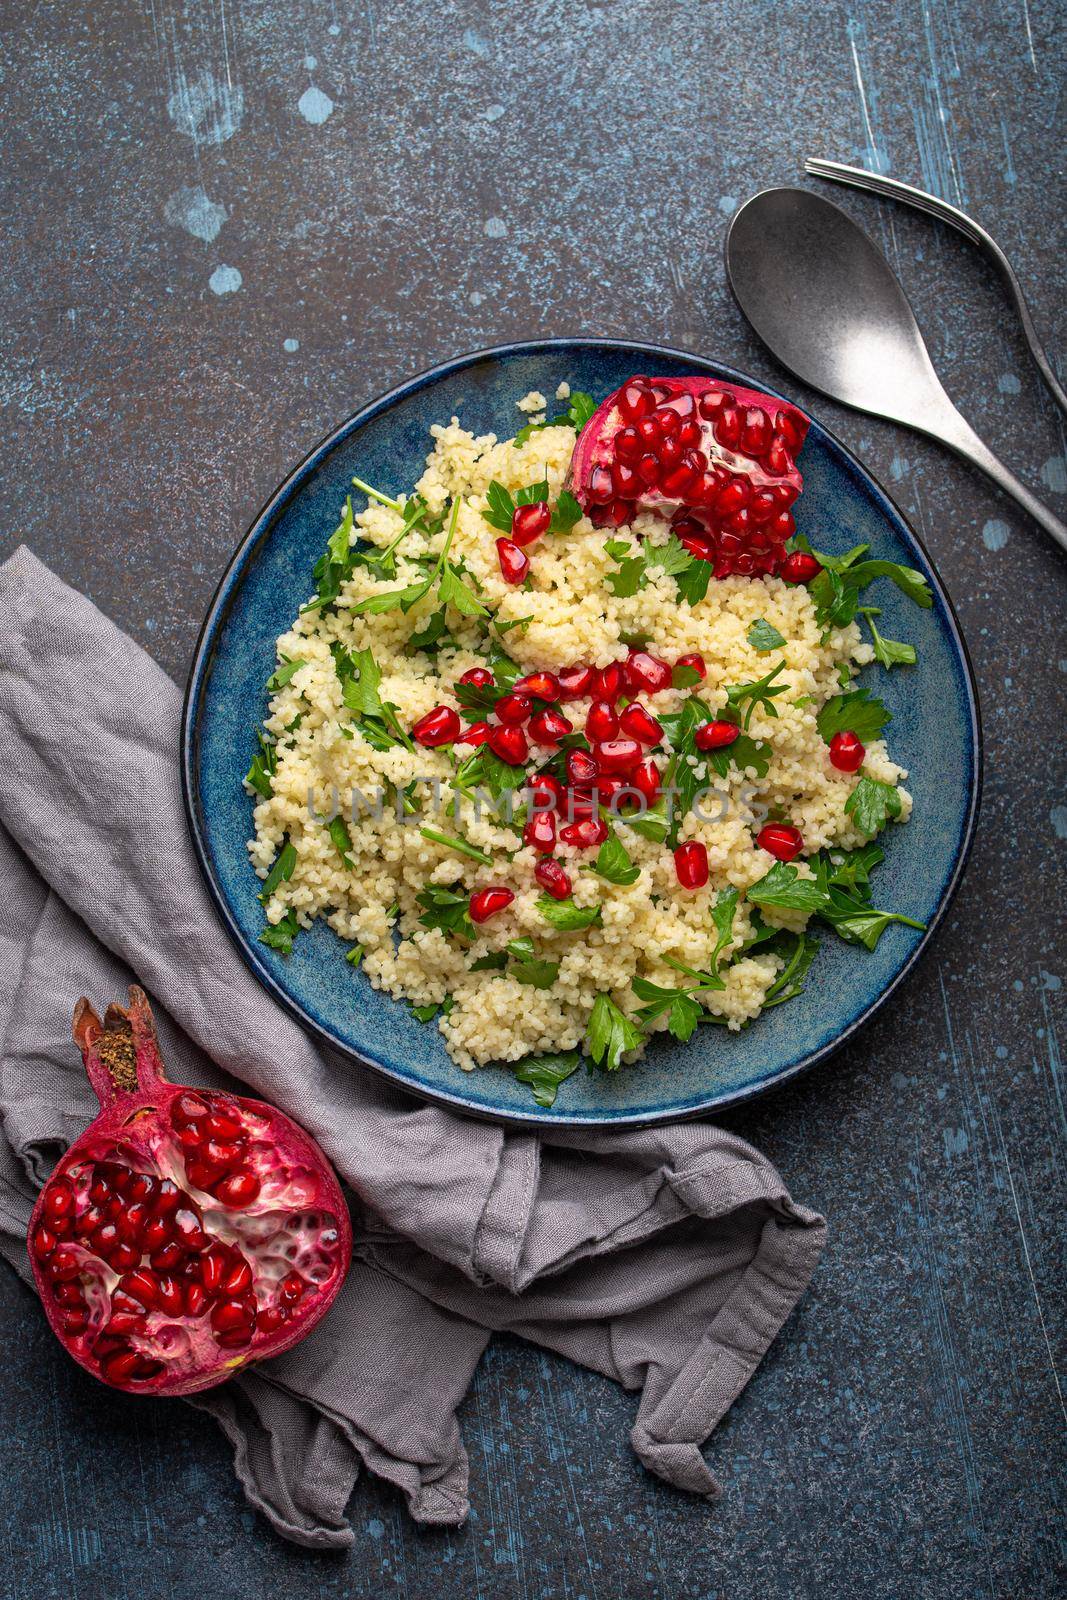 Tabbouleh salad with couscous and pomegranate by its_al_dente